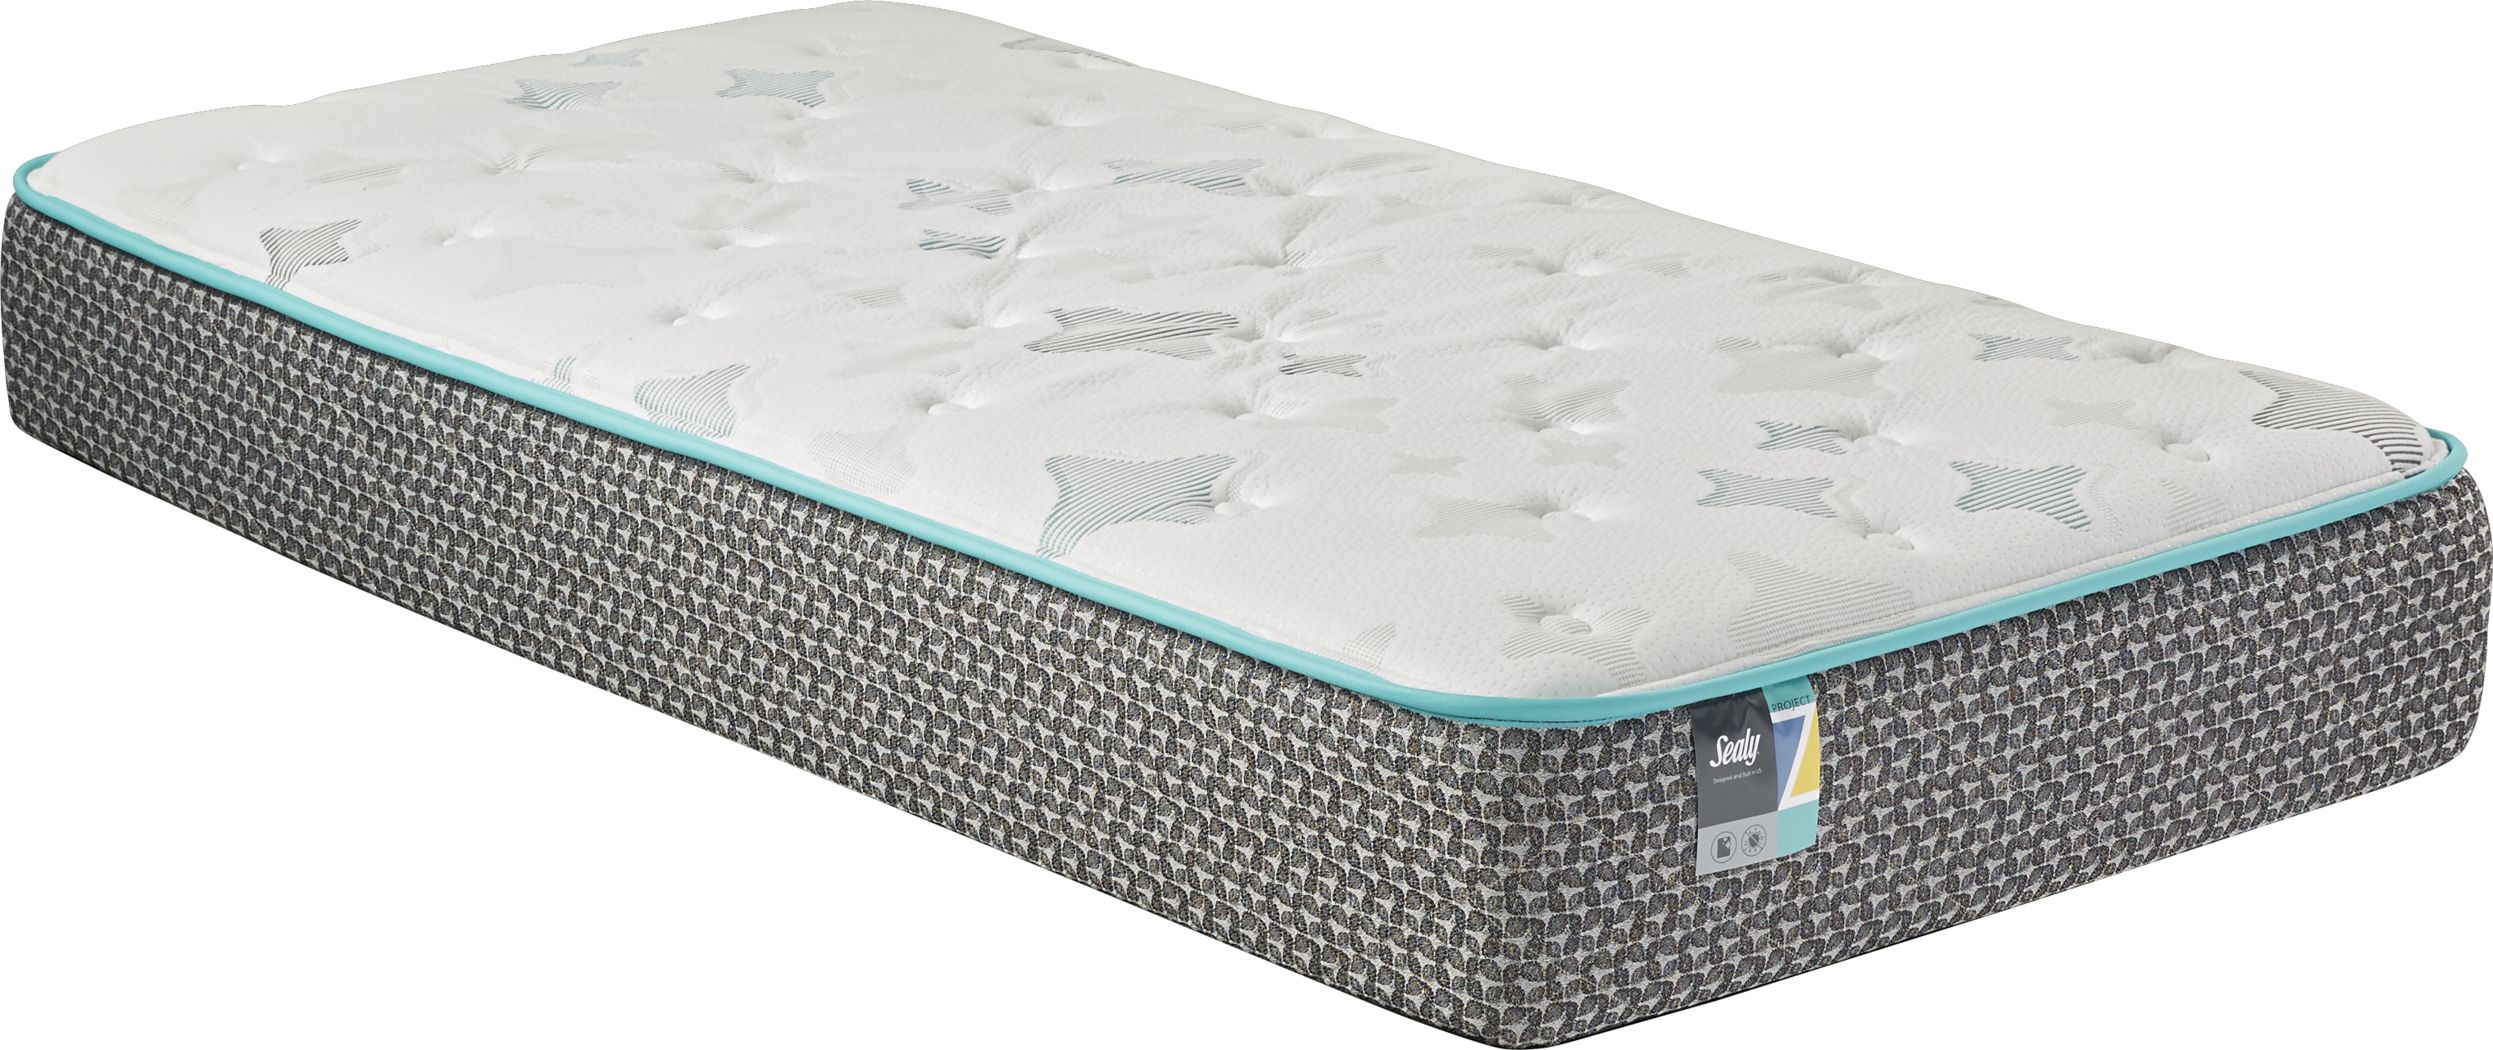 sealy dearborne twin mattress review